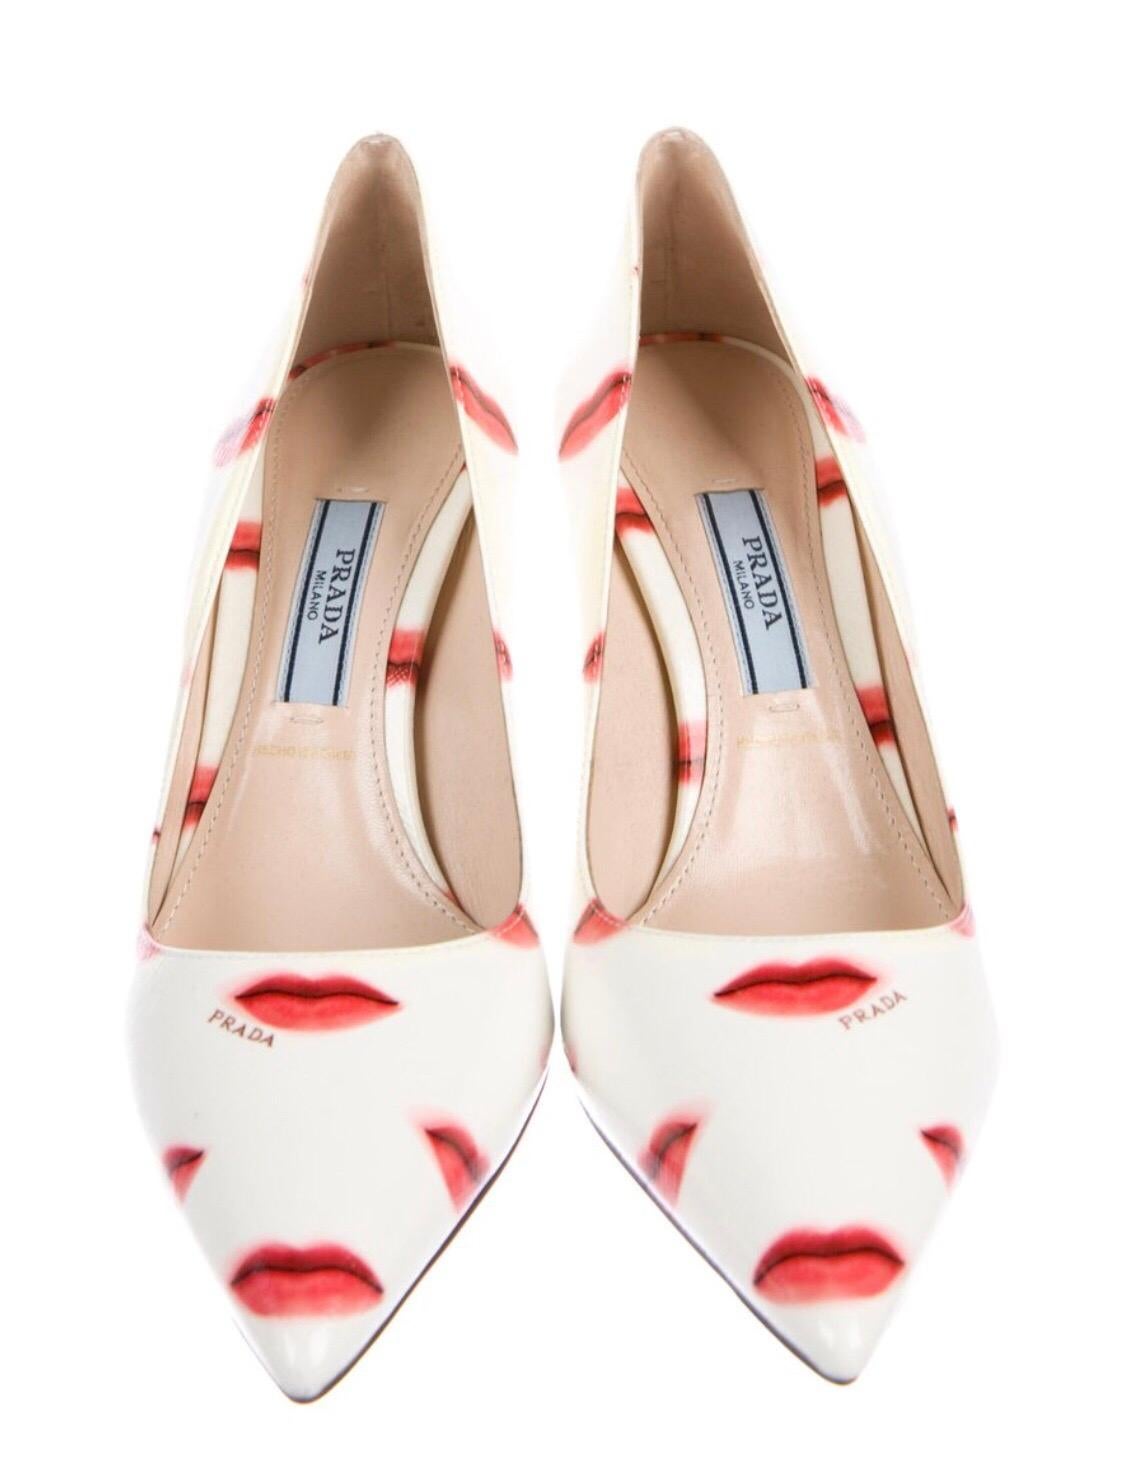 Prada Saffiano Leather Red Ivory Lip Point Toe Pumps Heels Shoes For Sale 2